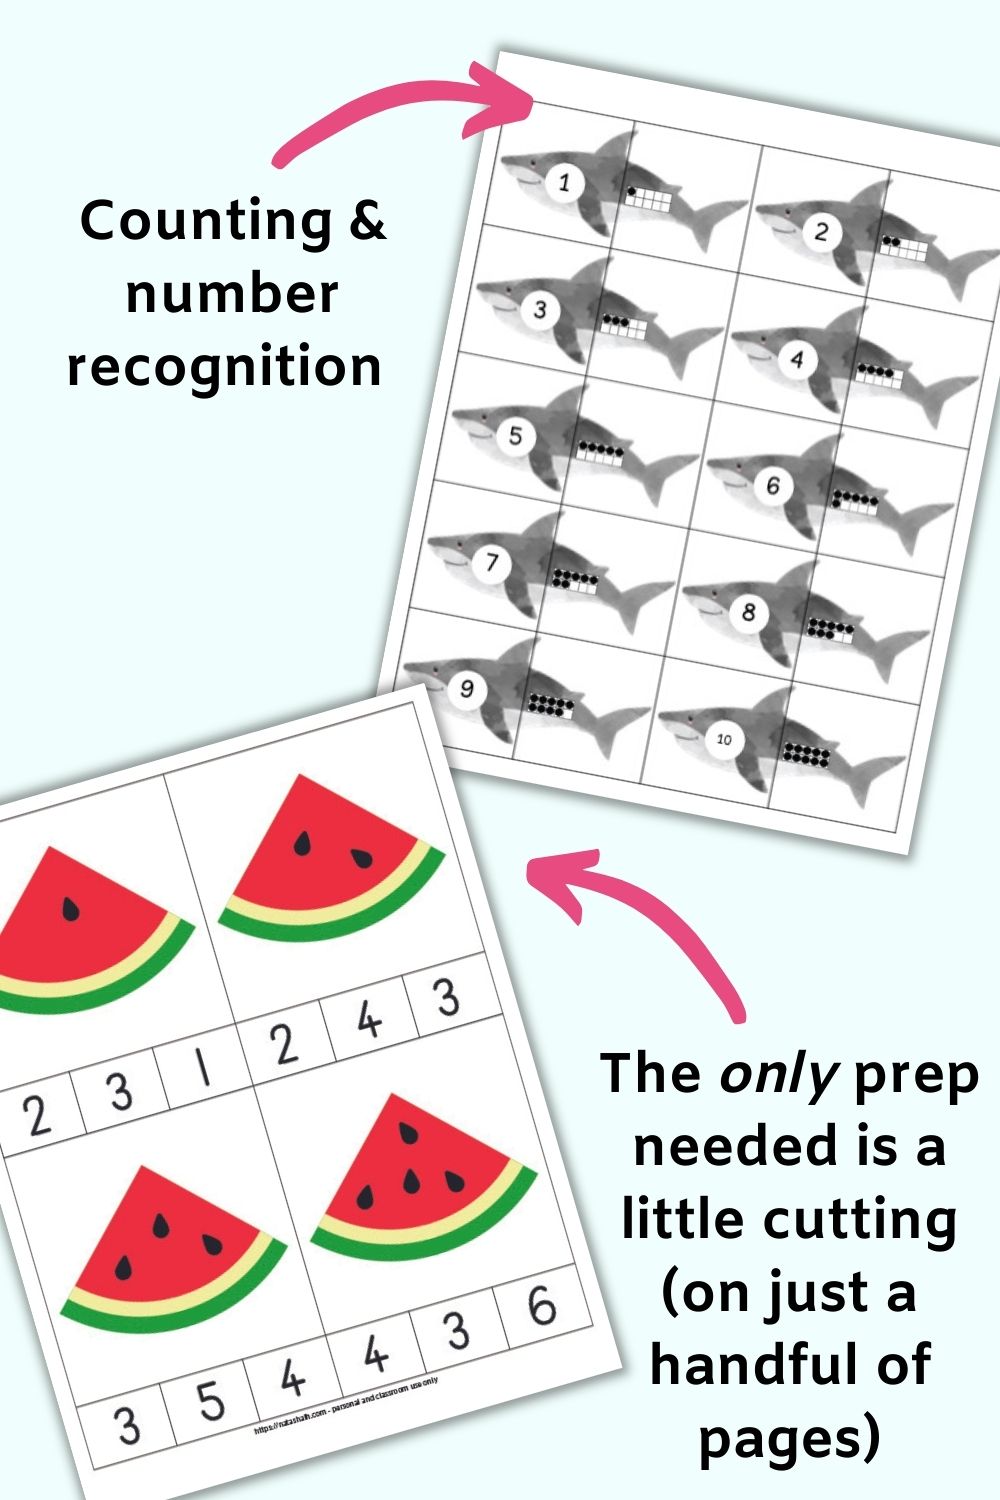 Text "counting and number recognition" pointing at shark matching cards to match numerals with ten frames and text "the only prep needed is a little cutting" with an arrow pointing at a coupon and clip card with watermelon.